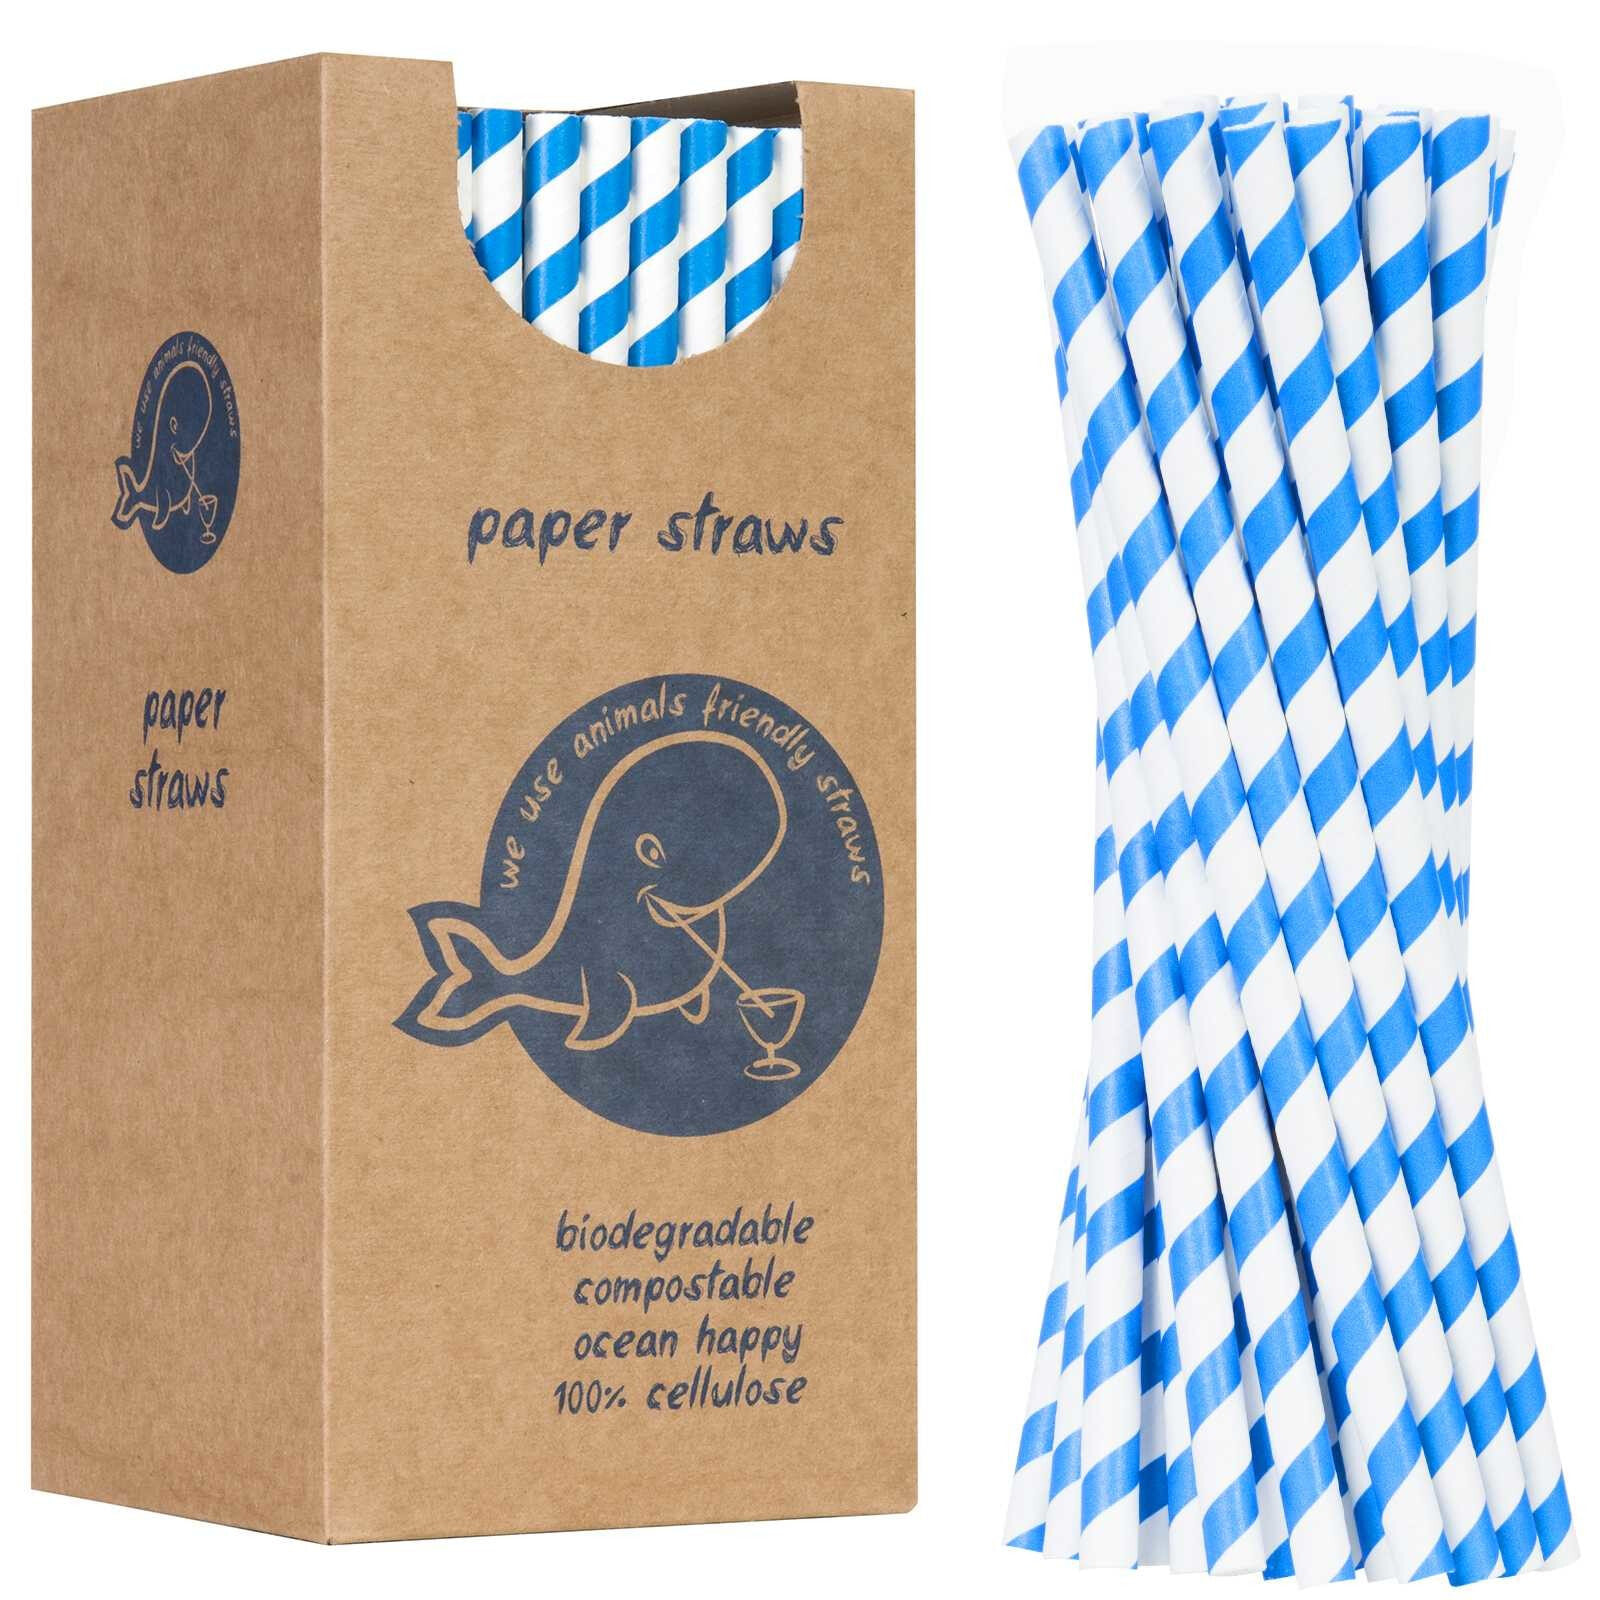 Paper straws BIO ecological PAPER STRAWS thick 8 / 205mm - white and blue 160 pcs.